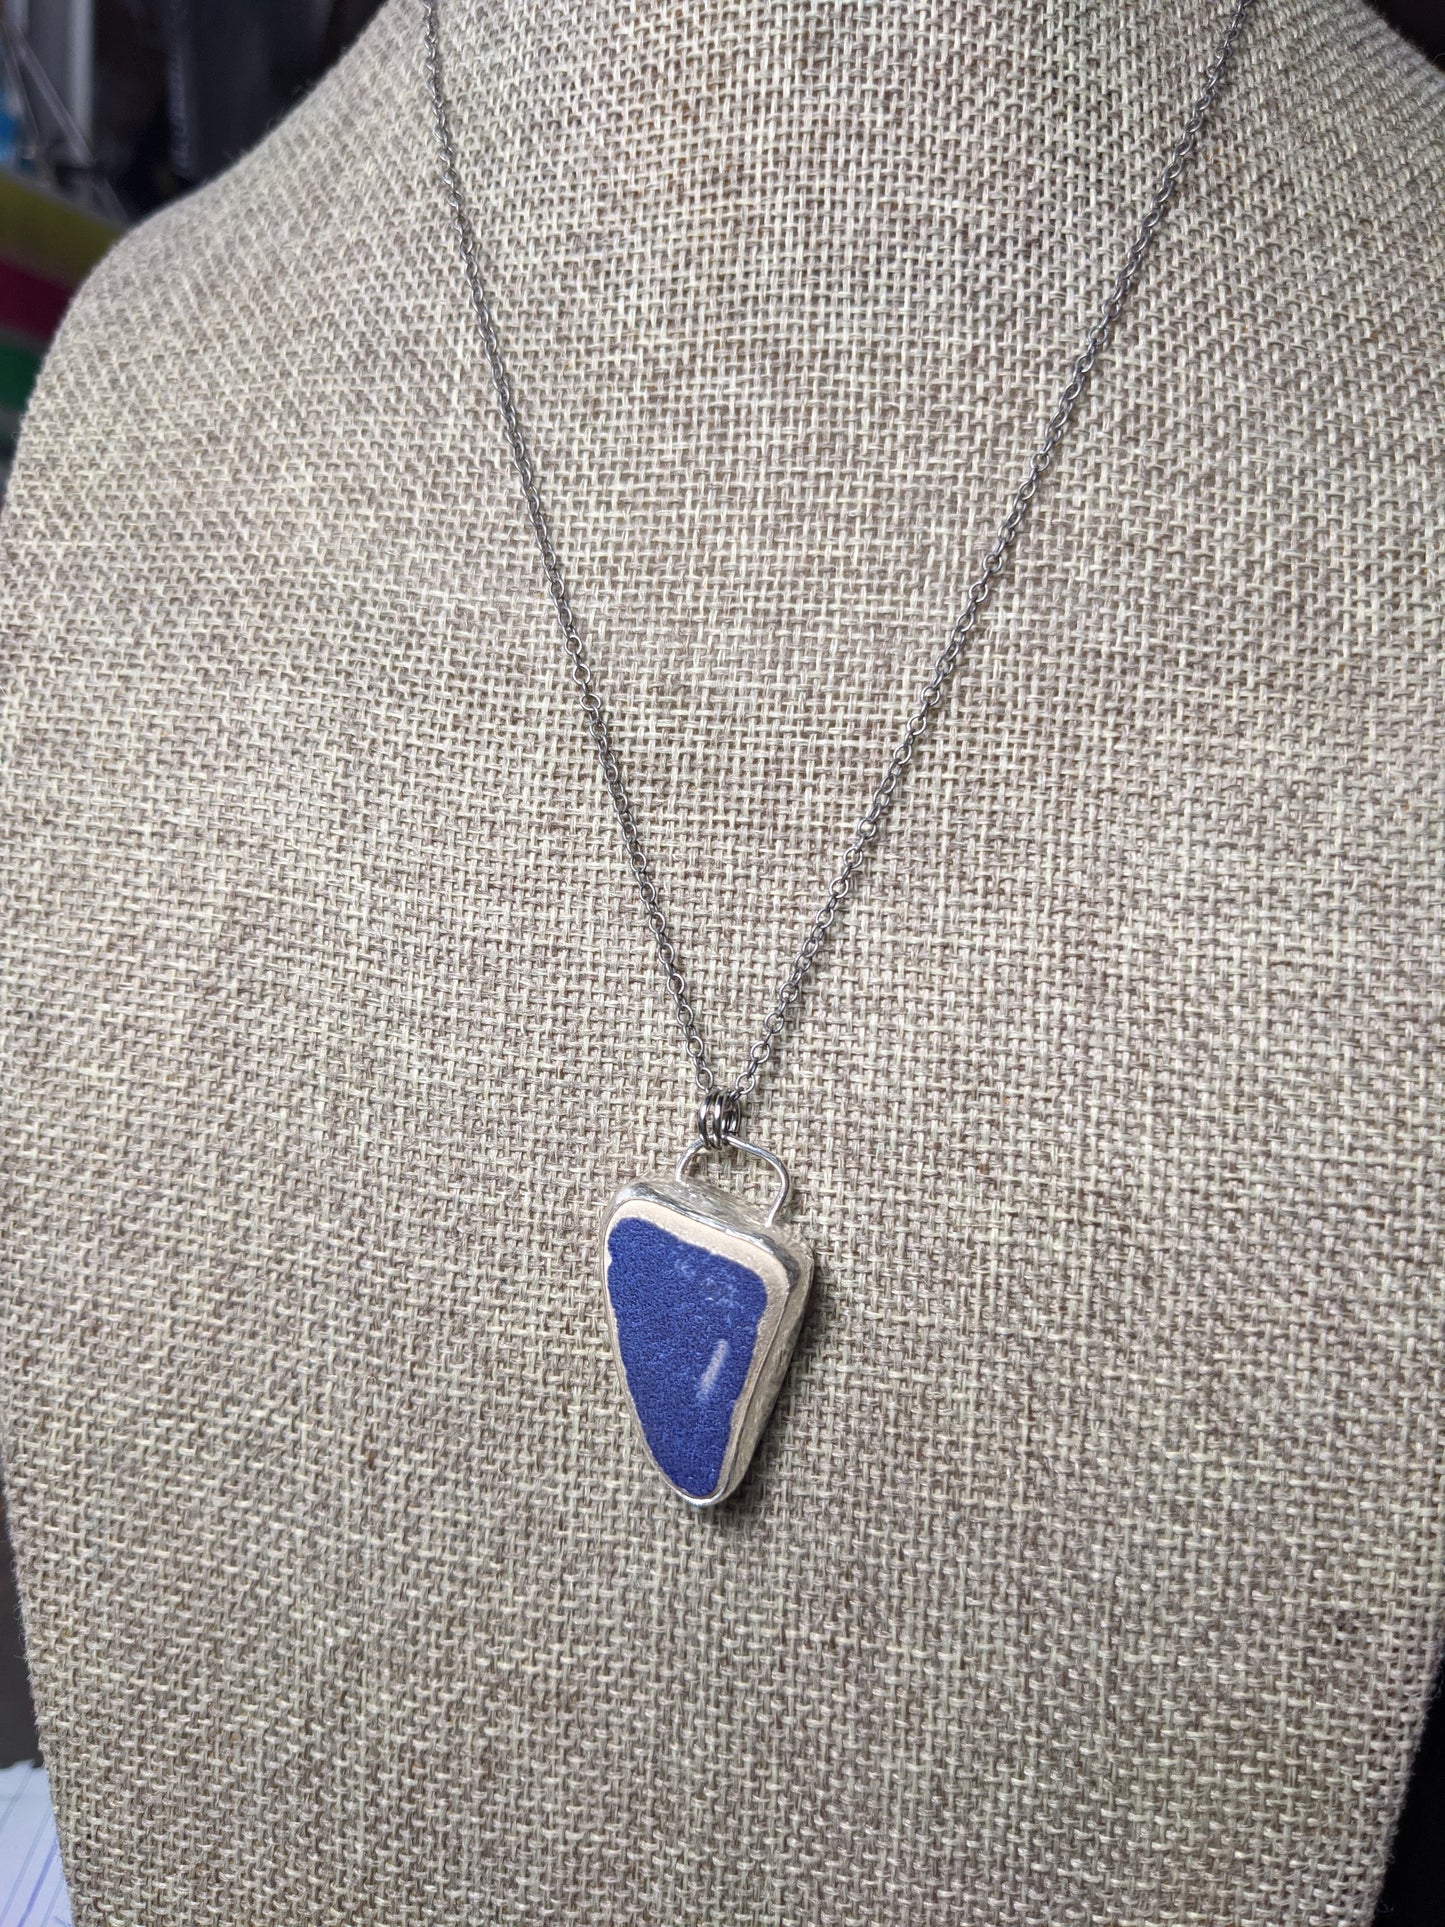 Rare! Ocean Tumbled Blue Tile Pendant on Sterling Silver Chain